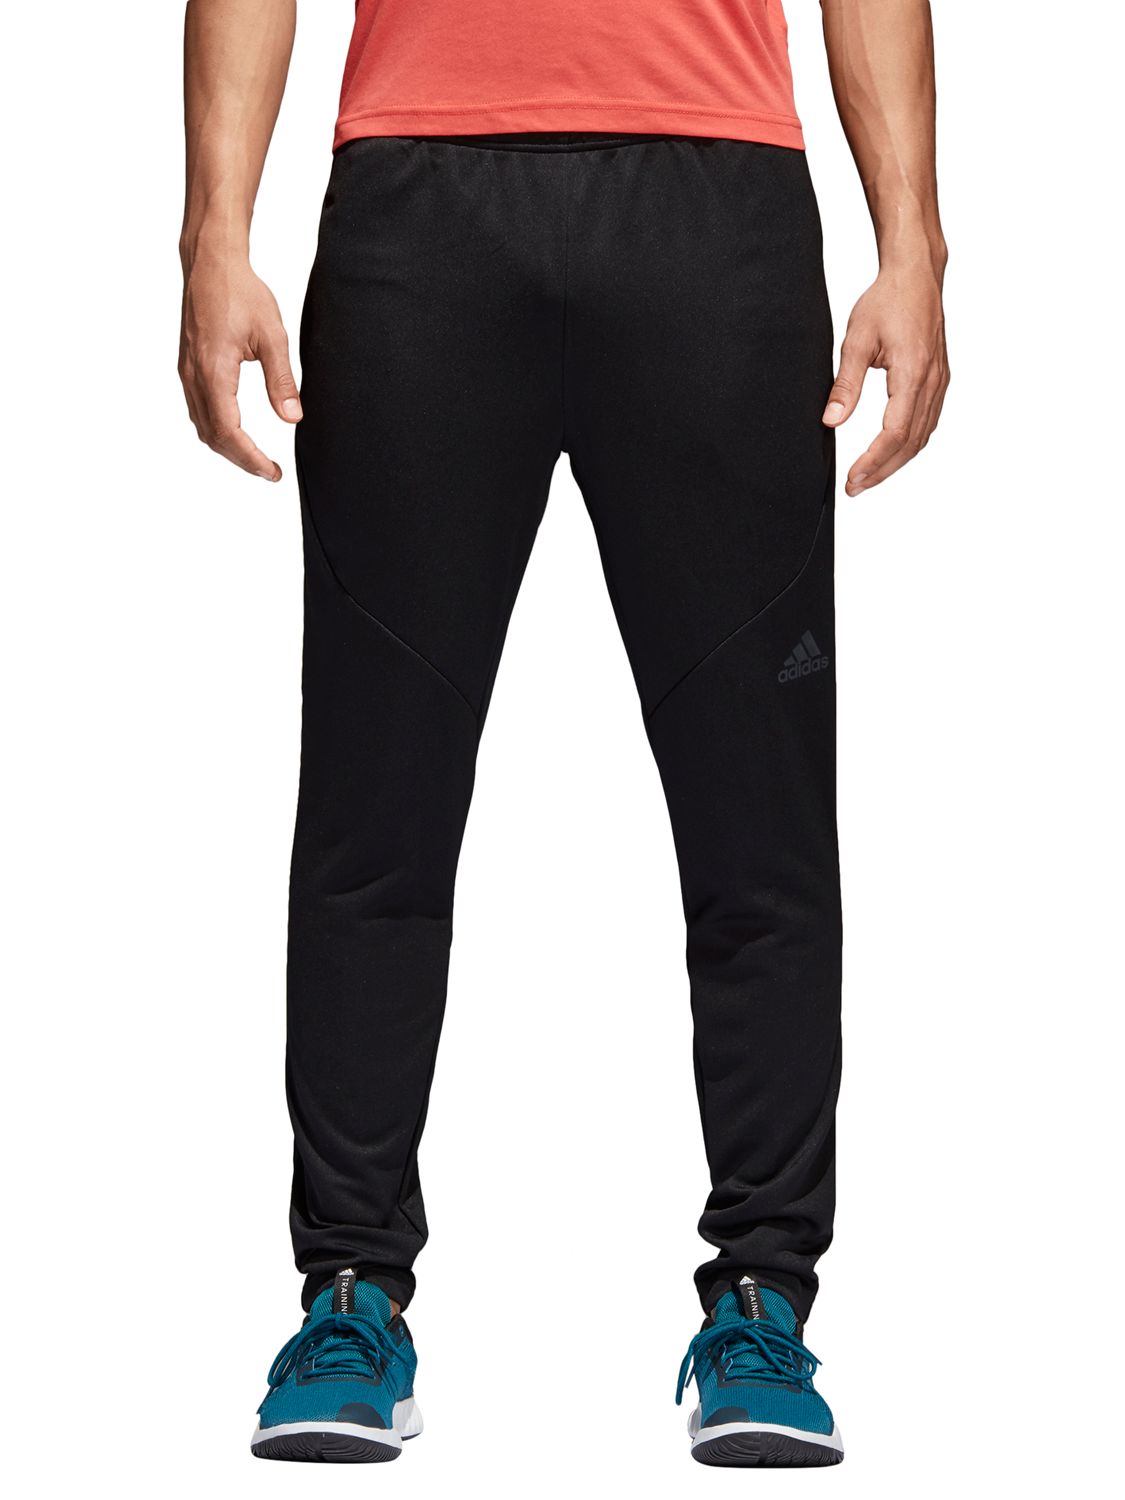 climalite joggers